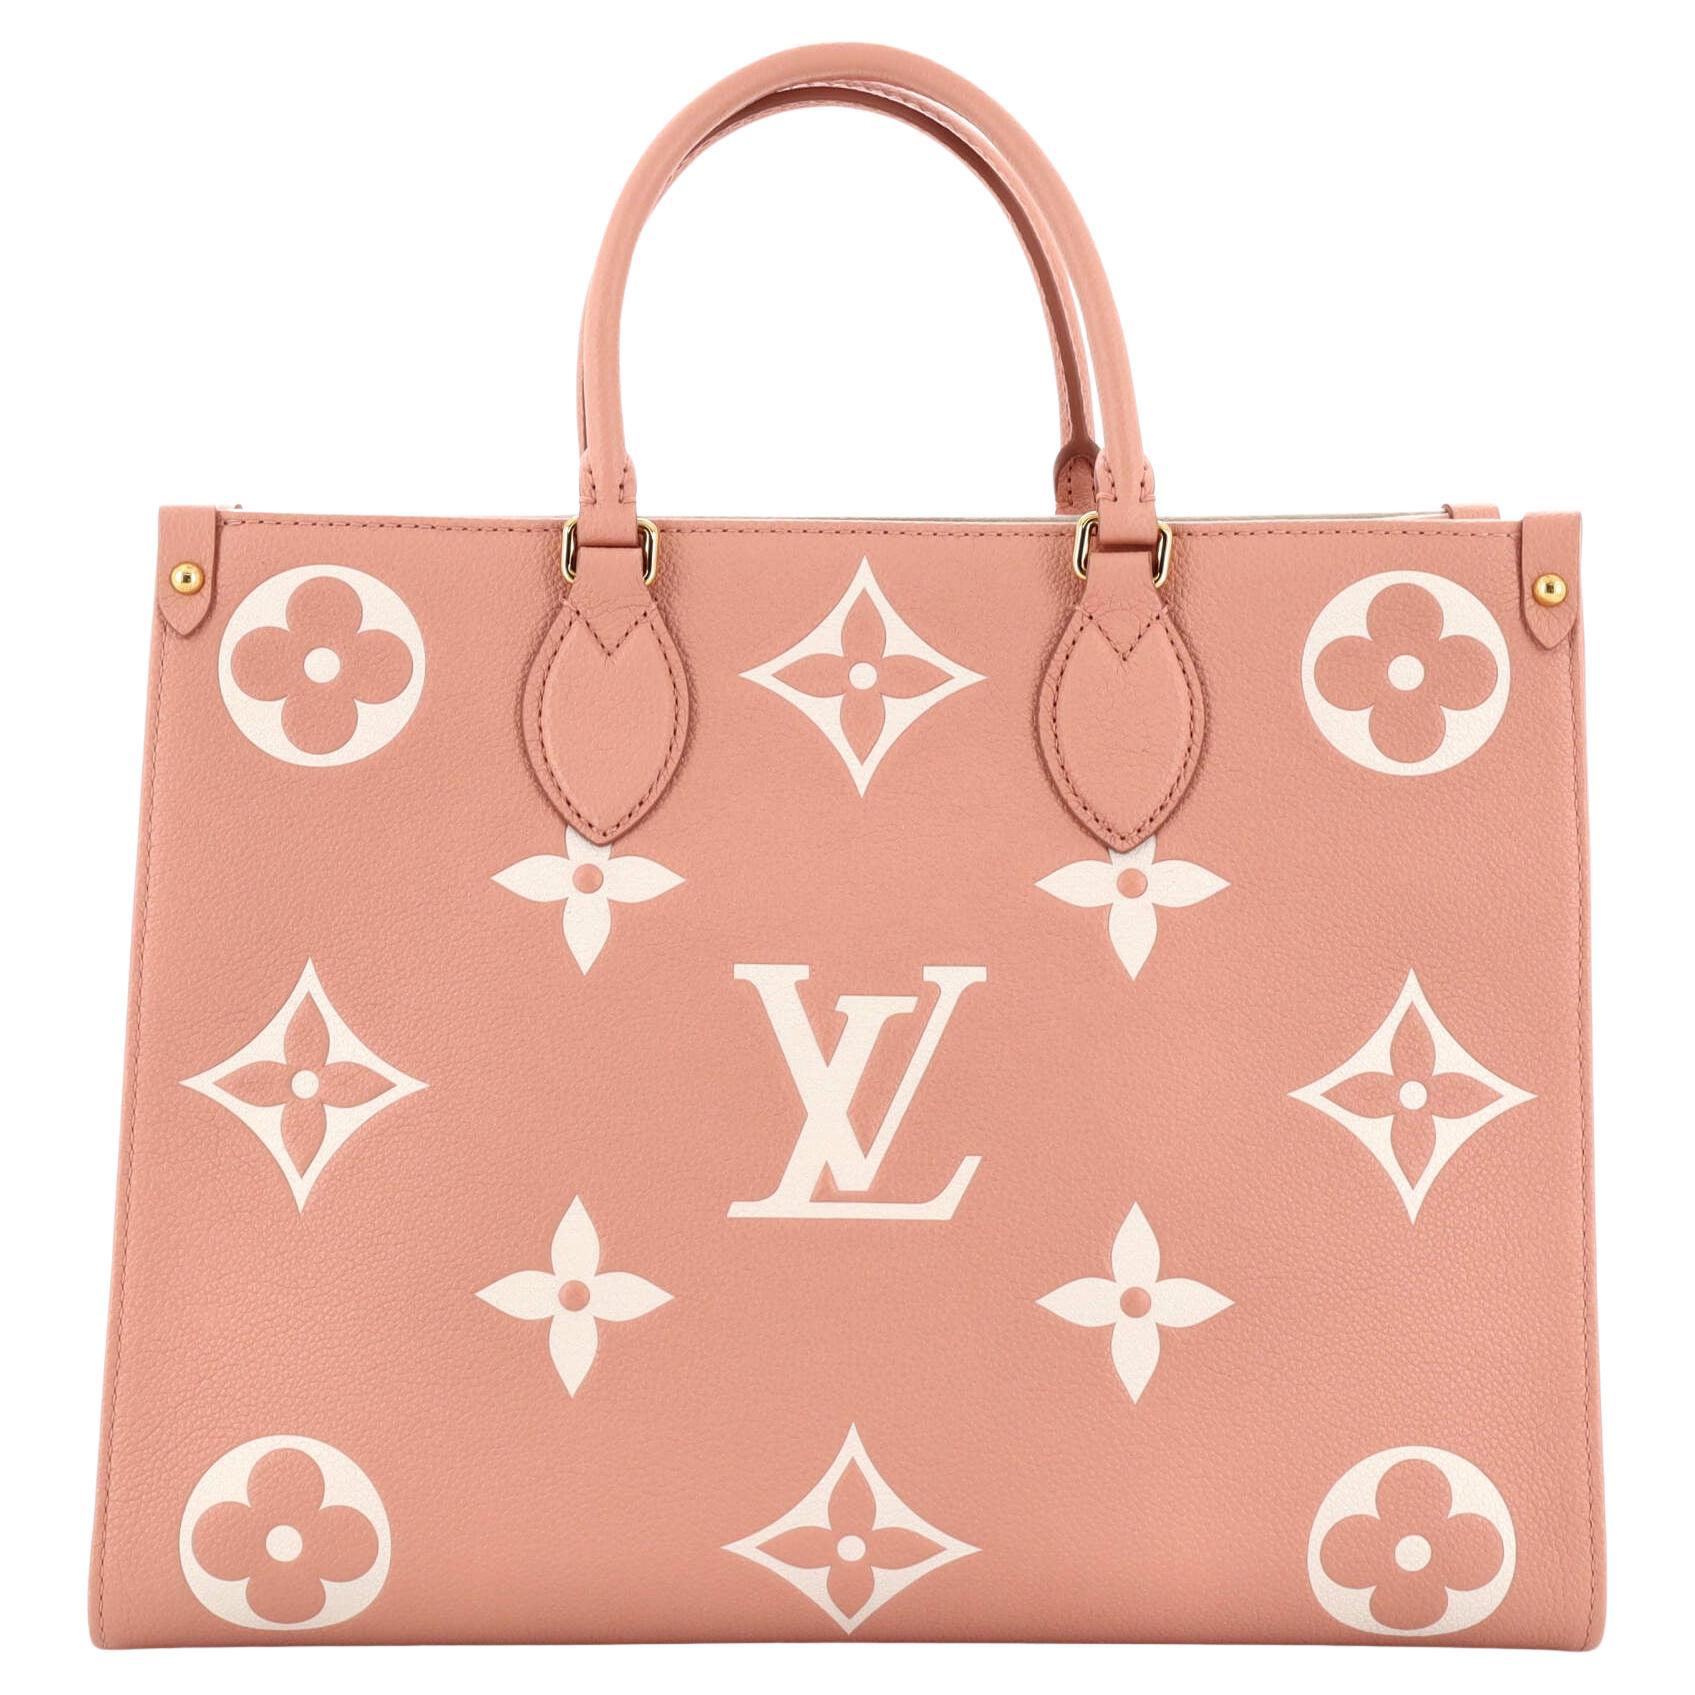 Louis Vuitton Puffer Tote - 2 For Sale on 1stDibs  louis vuitton puffer bag,  louis vuitton on the go puffer bag, puffer bag louis vuitton